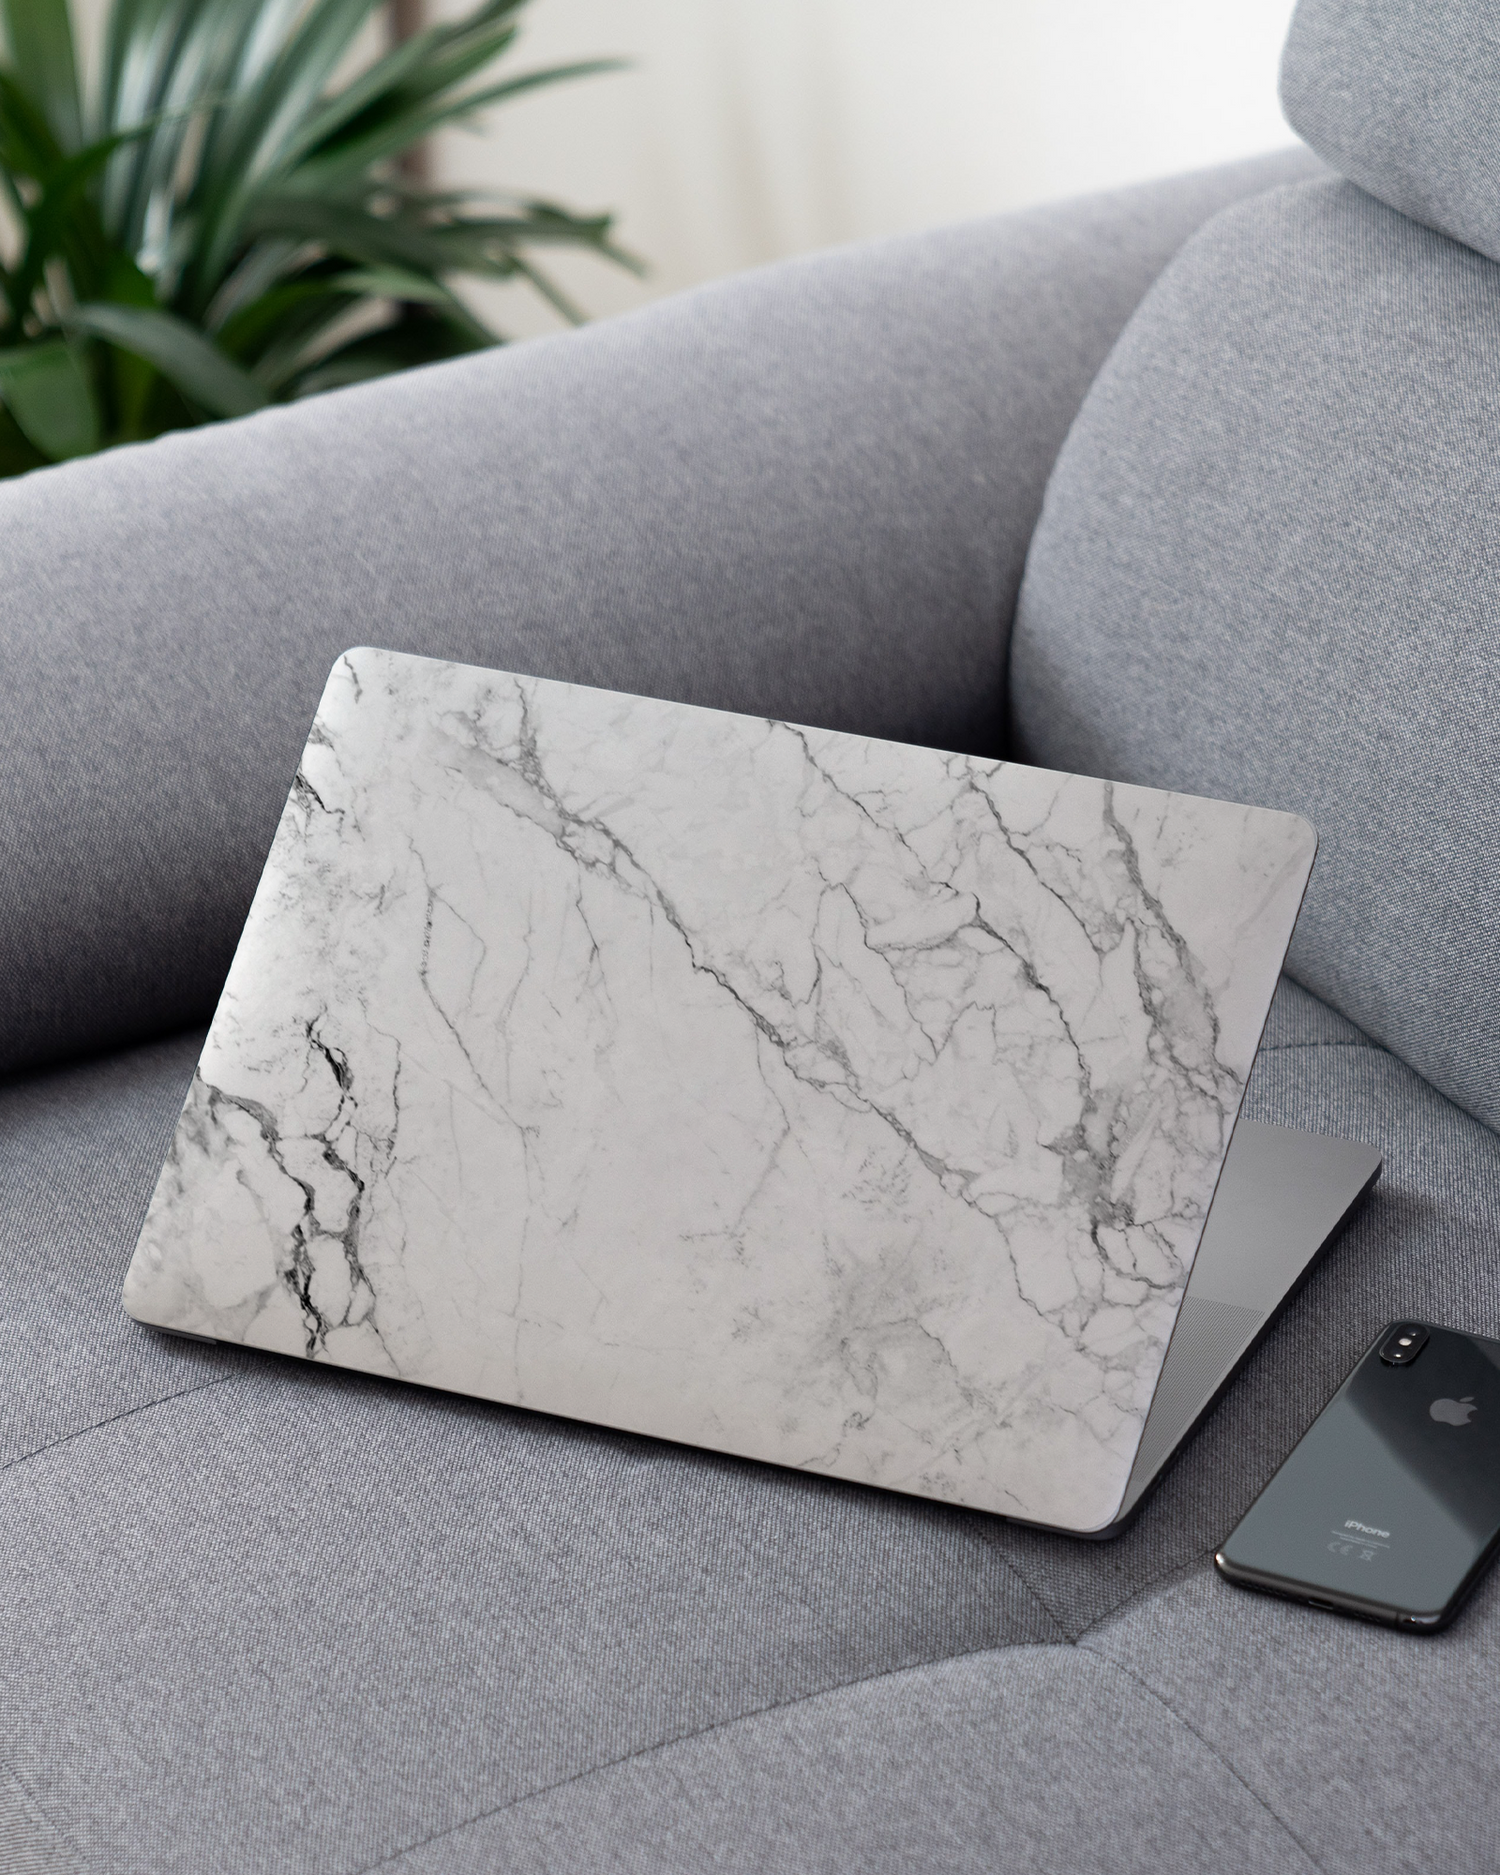 White Marble Laptop Skin for 13 inch Apple MacBooks on a couch